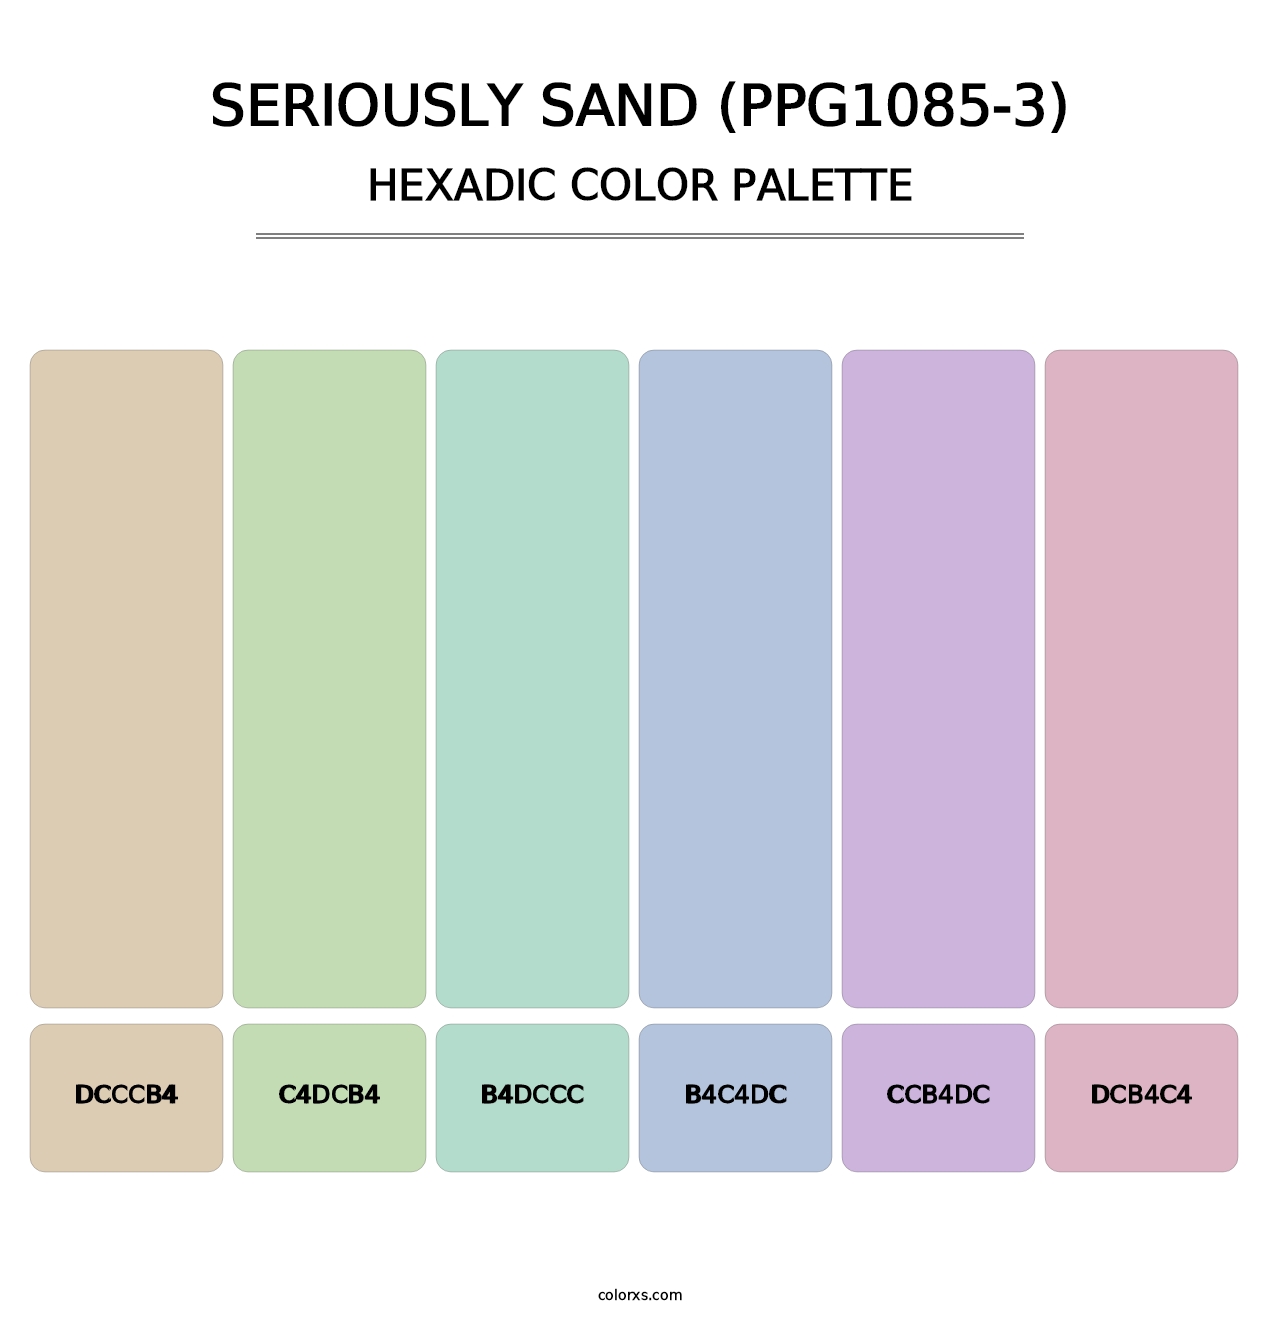 Seriously Sand (PPG1085-3) - Hexadic Color Palette